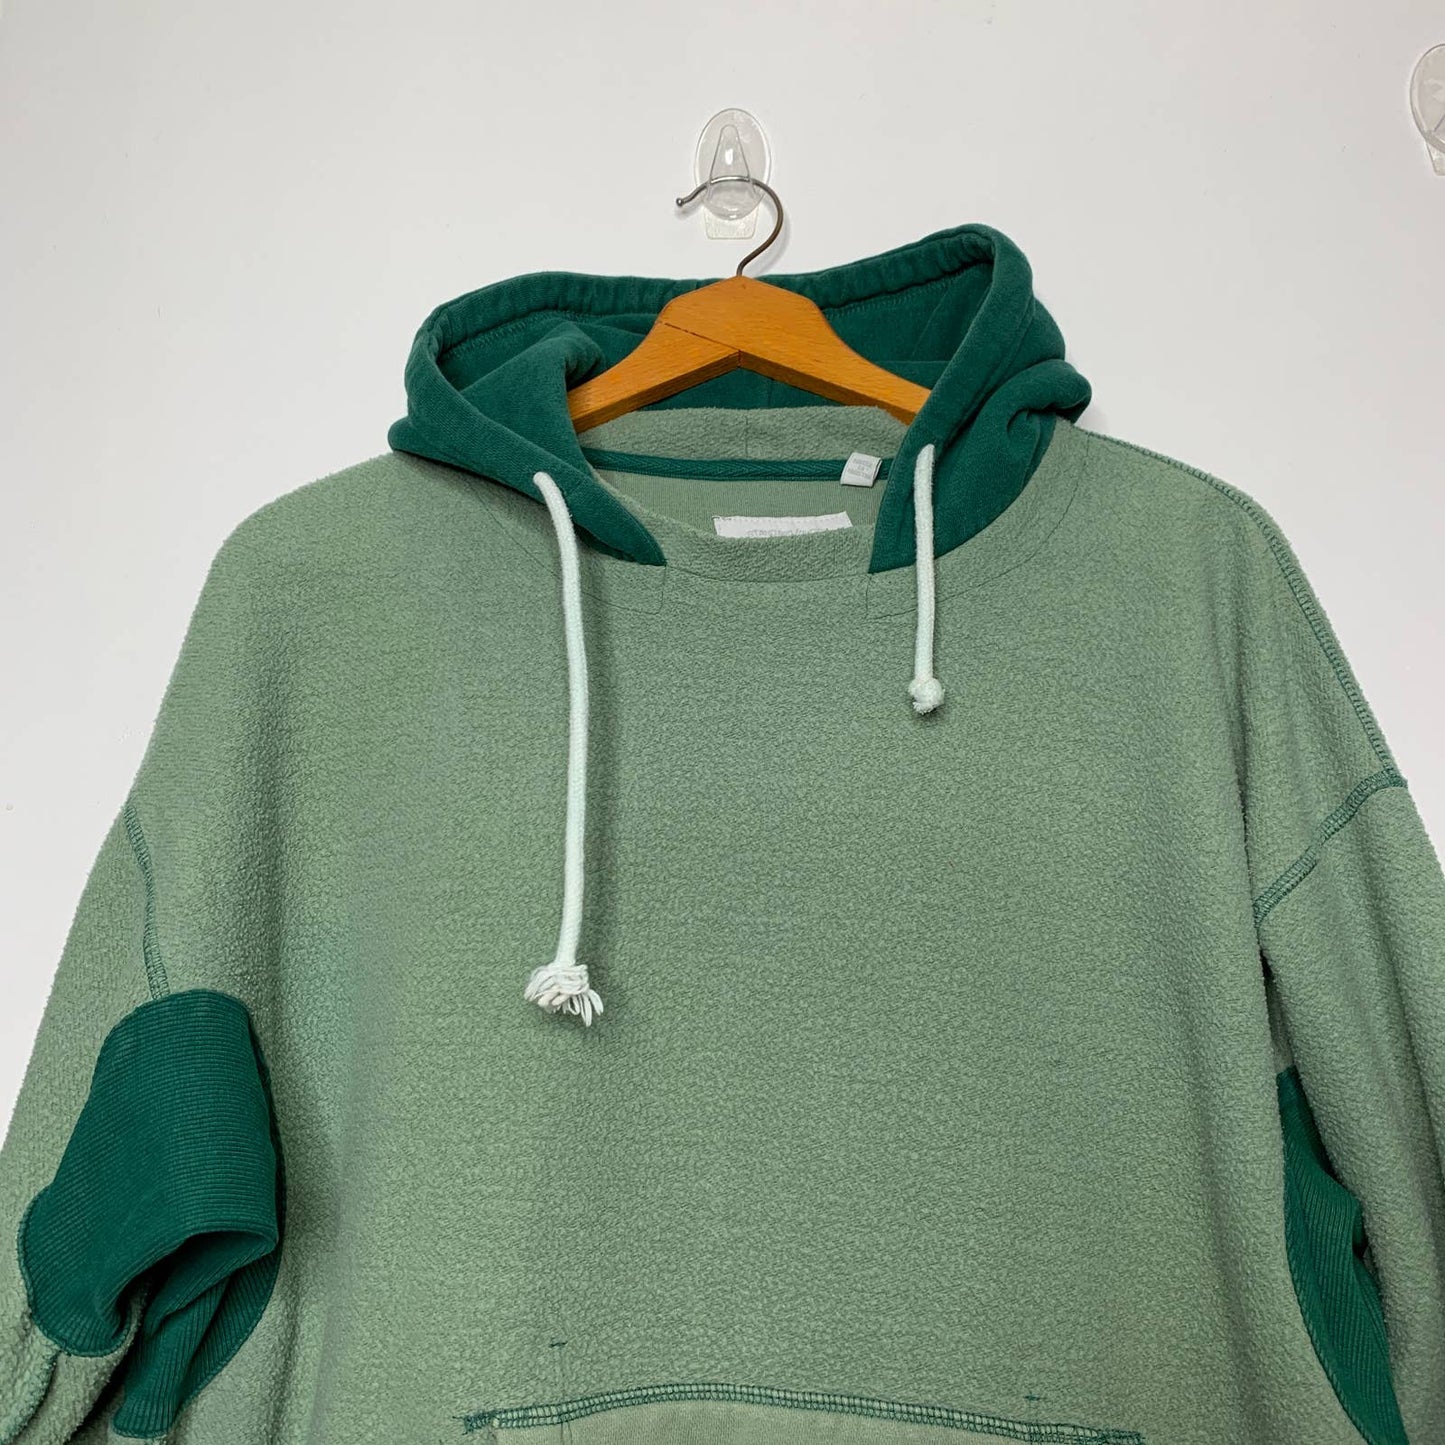 Standard Cloth Reverse Inside Out hoodie SZ S